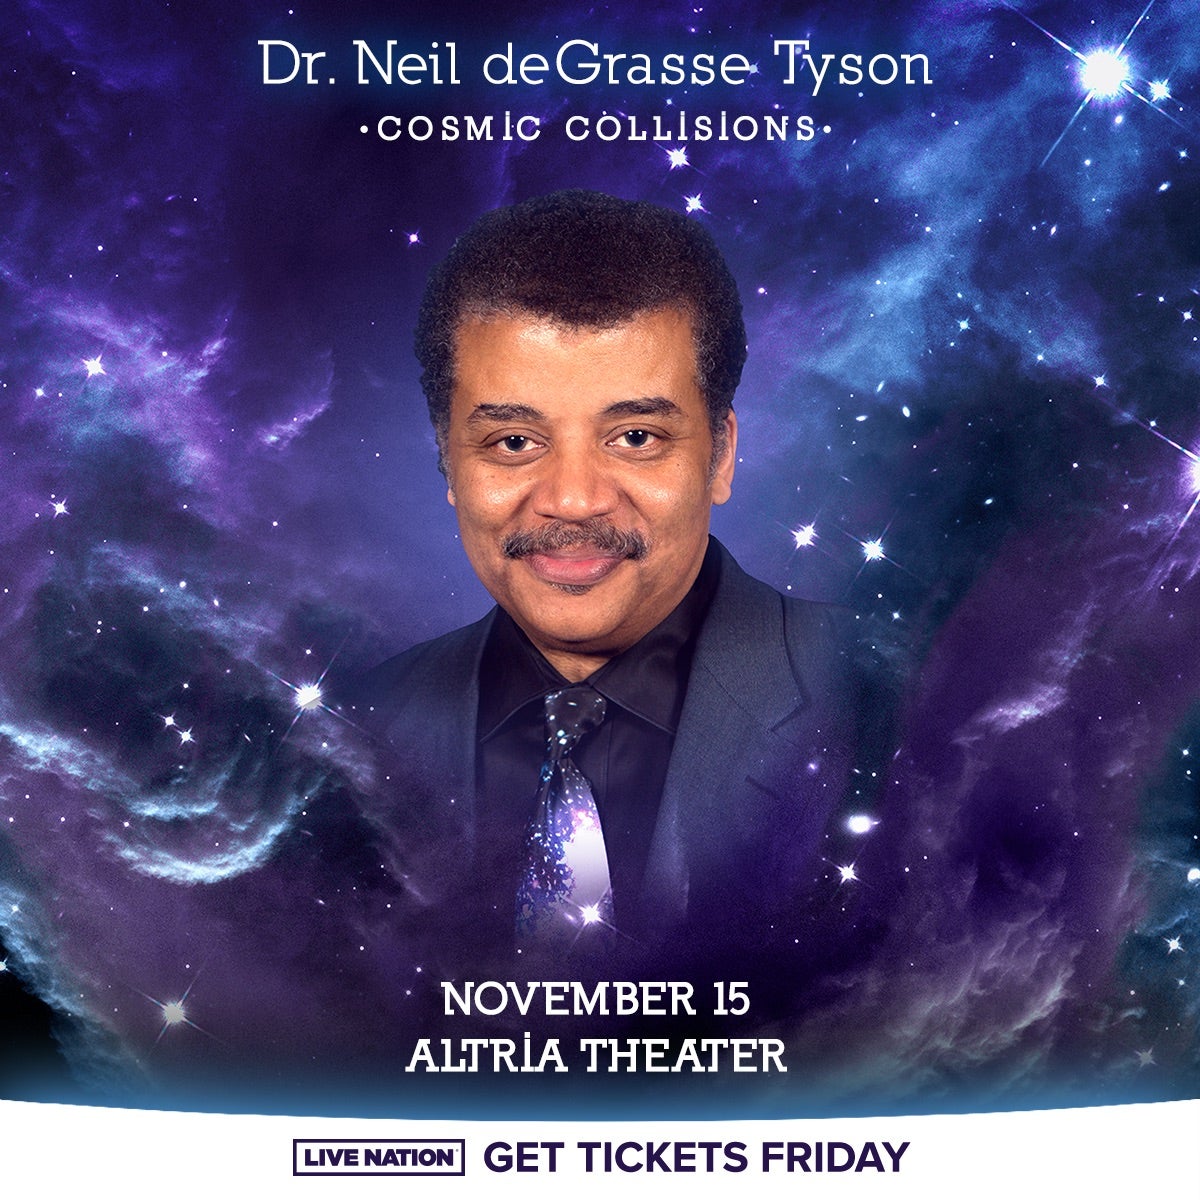 More Info for DR. NEIL DEGRASSE TYSON RETURNS TO ALTRIA THEATER